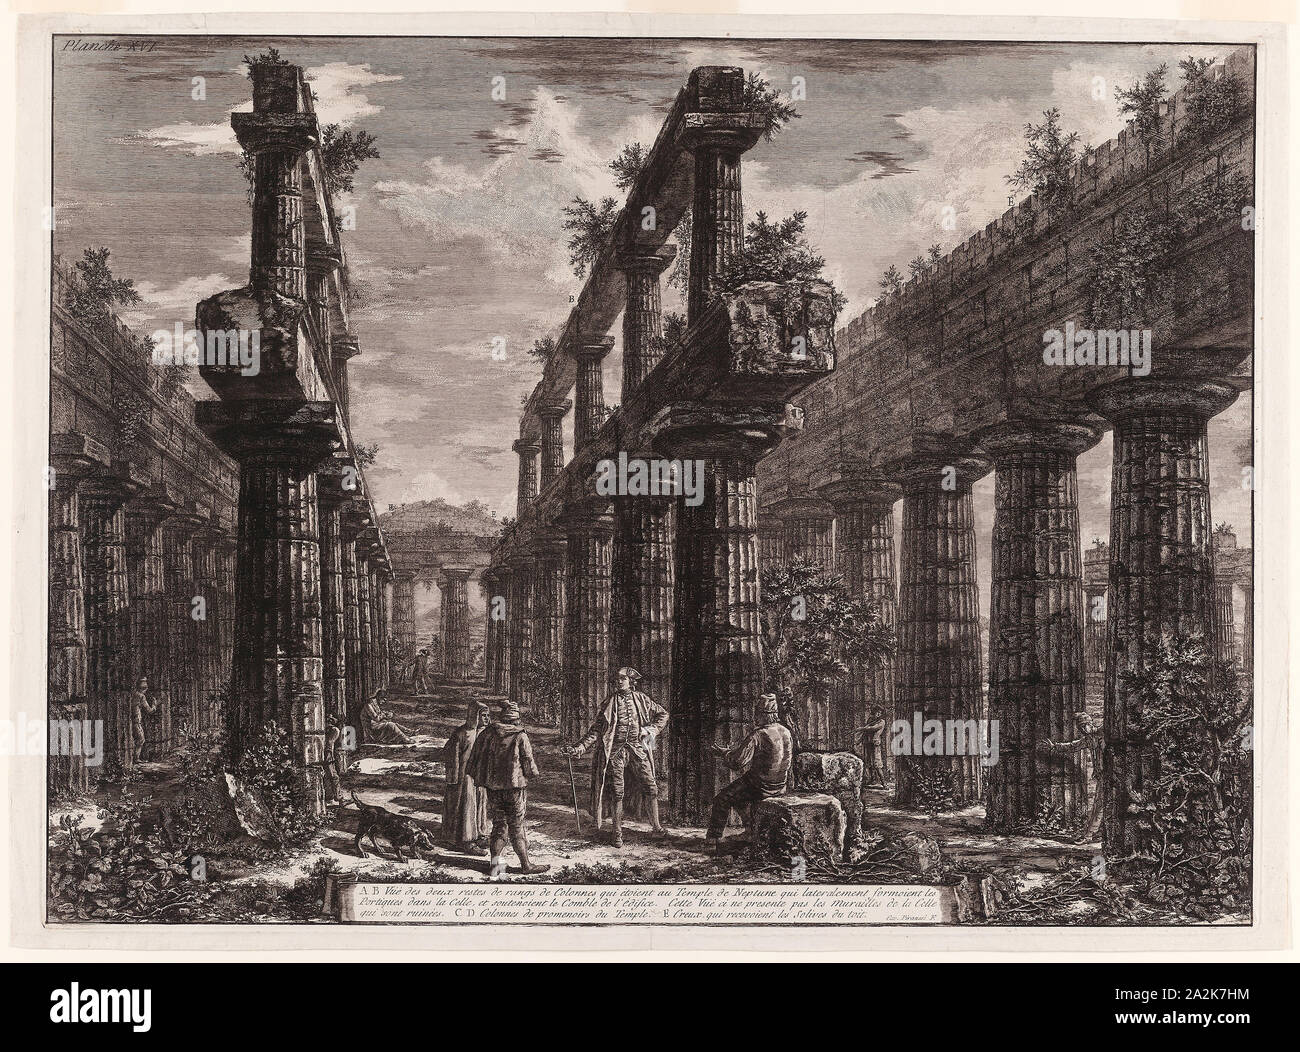 A., B. View of the remains of the two rows of columns in the Temple of Neptune which originally formed the colonnades along the sides of the cella, and supported the uppermost part of the roof, from Different views of Paestum, 1778, Giovanni Battista Piranesi, Italian, 1720-1778, Italy, Etching on ivory laid paper, 498 x 675 mm (image), 503 x 684 mm (plate), 525 x 715 mm (sheet Stock Photo